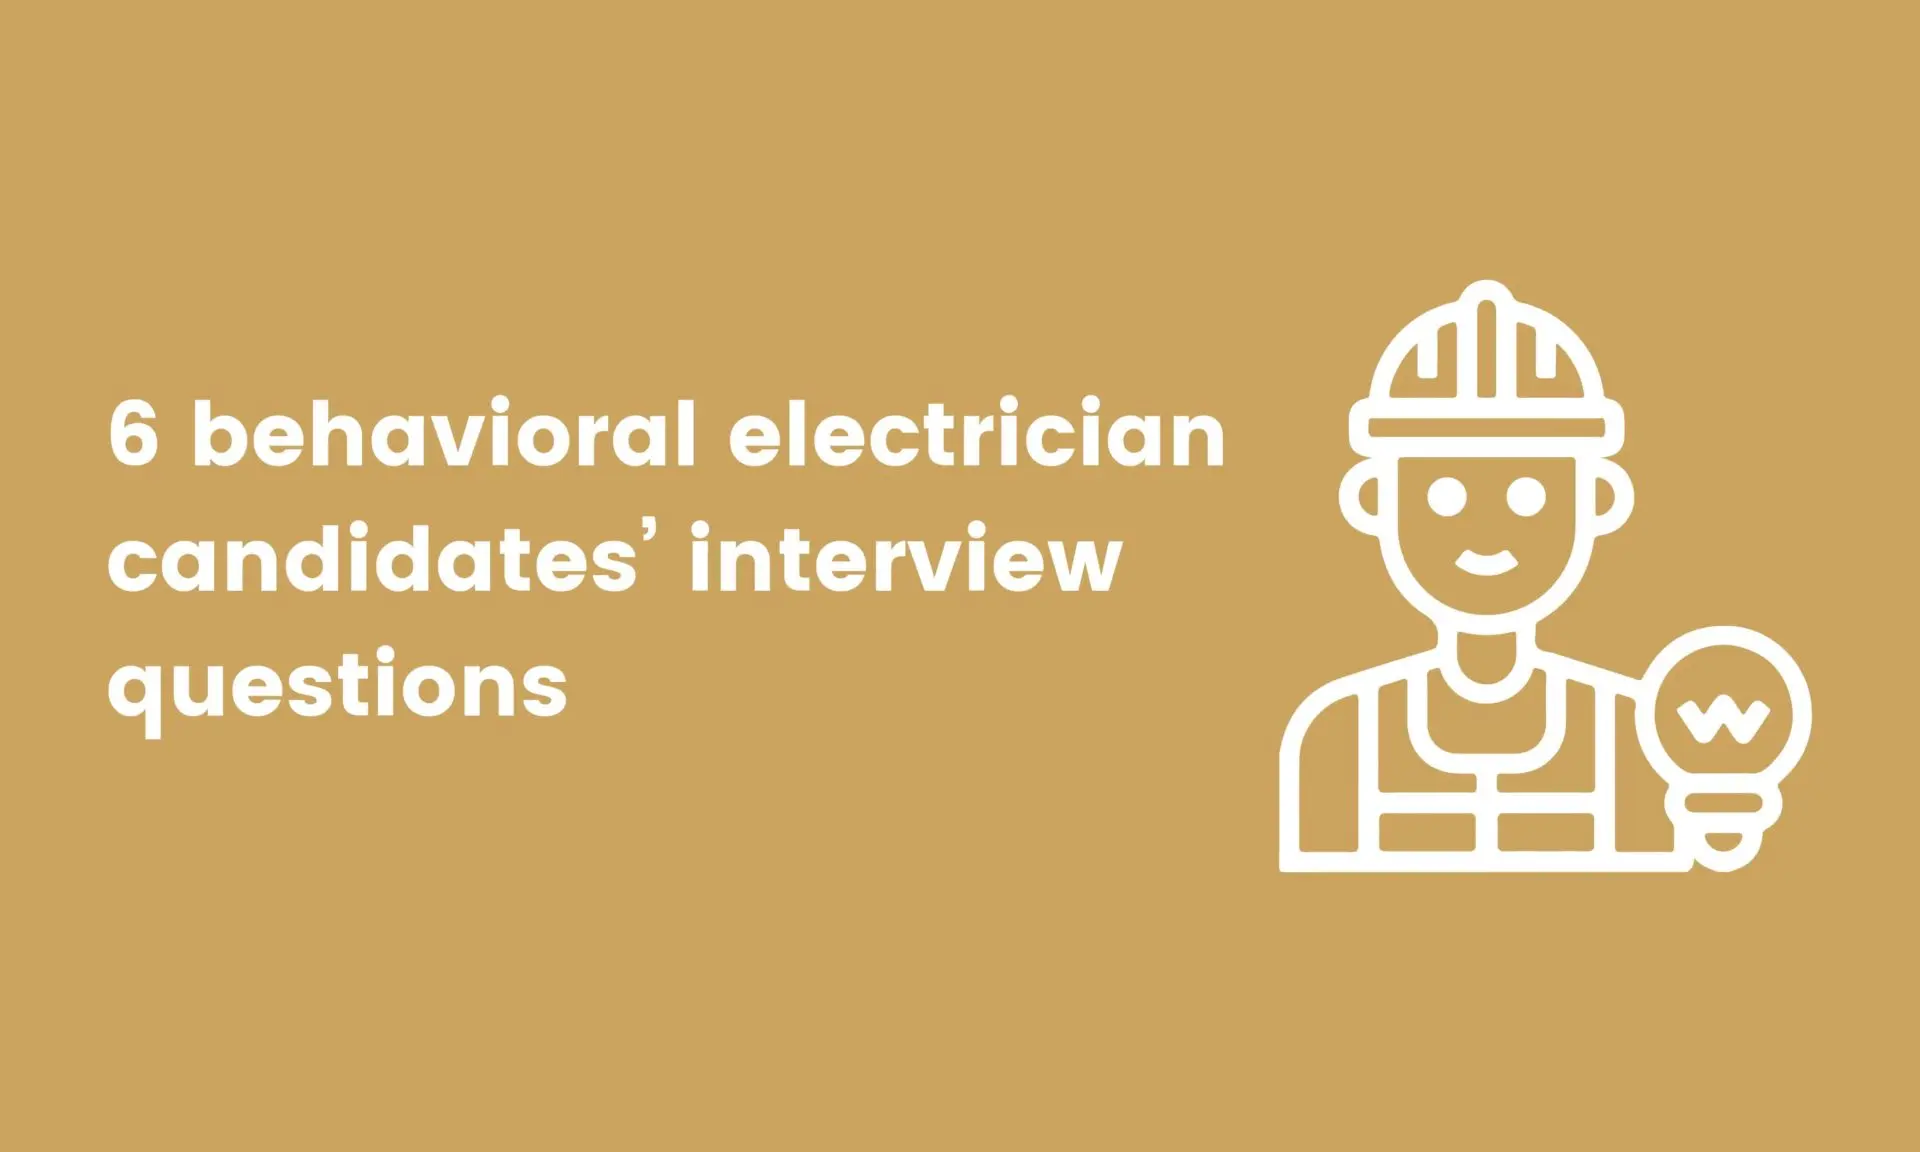 banner image for 6 behavioral electrician candidates’ interview questions